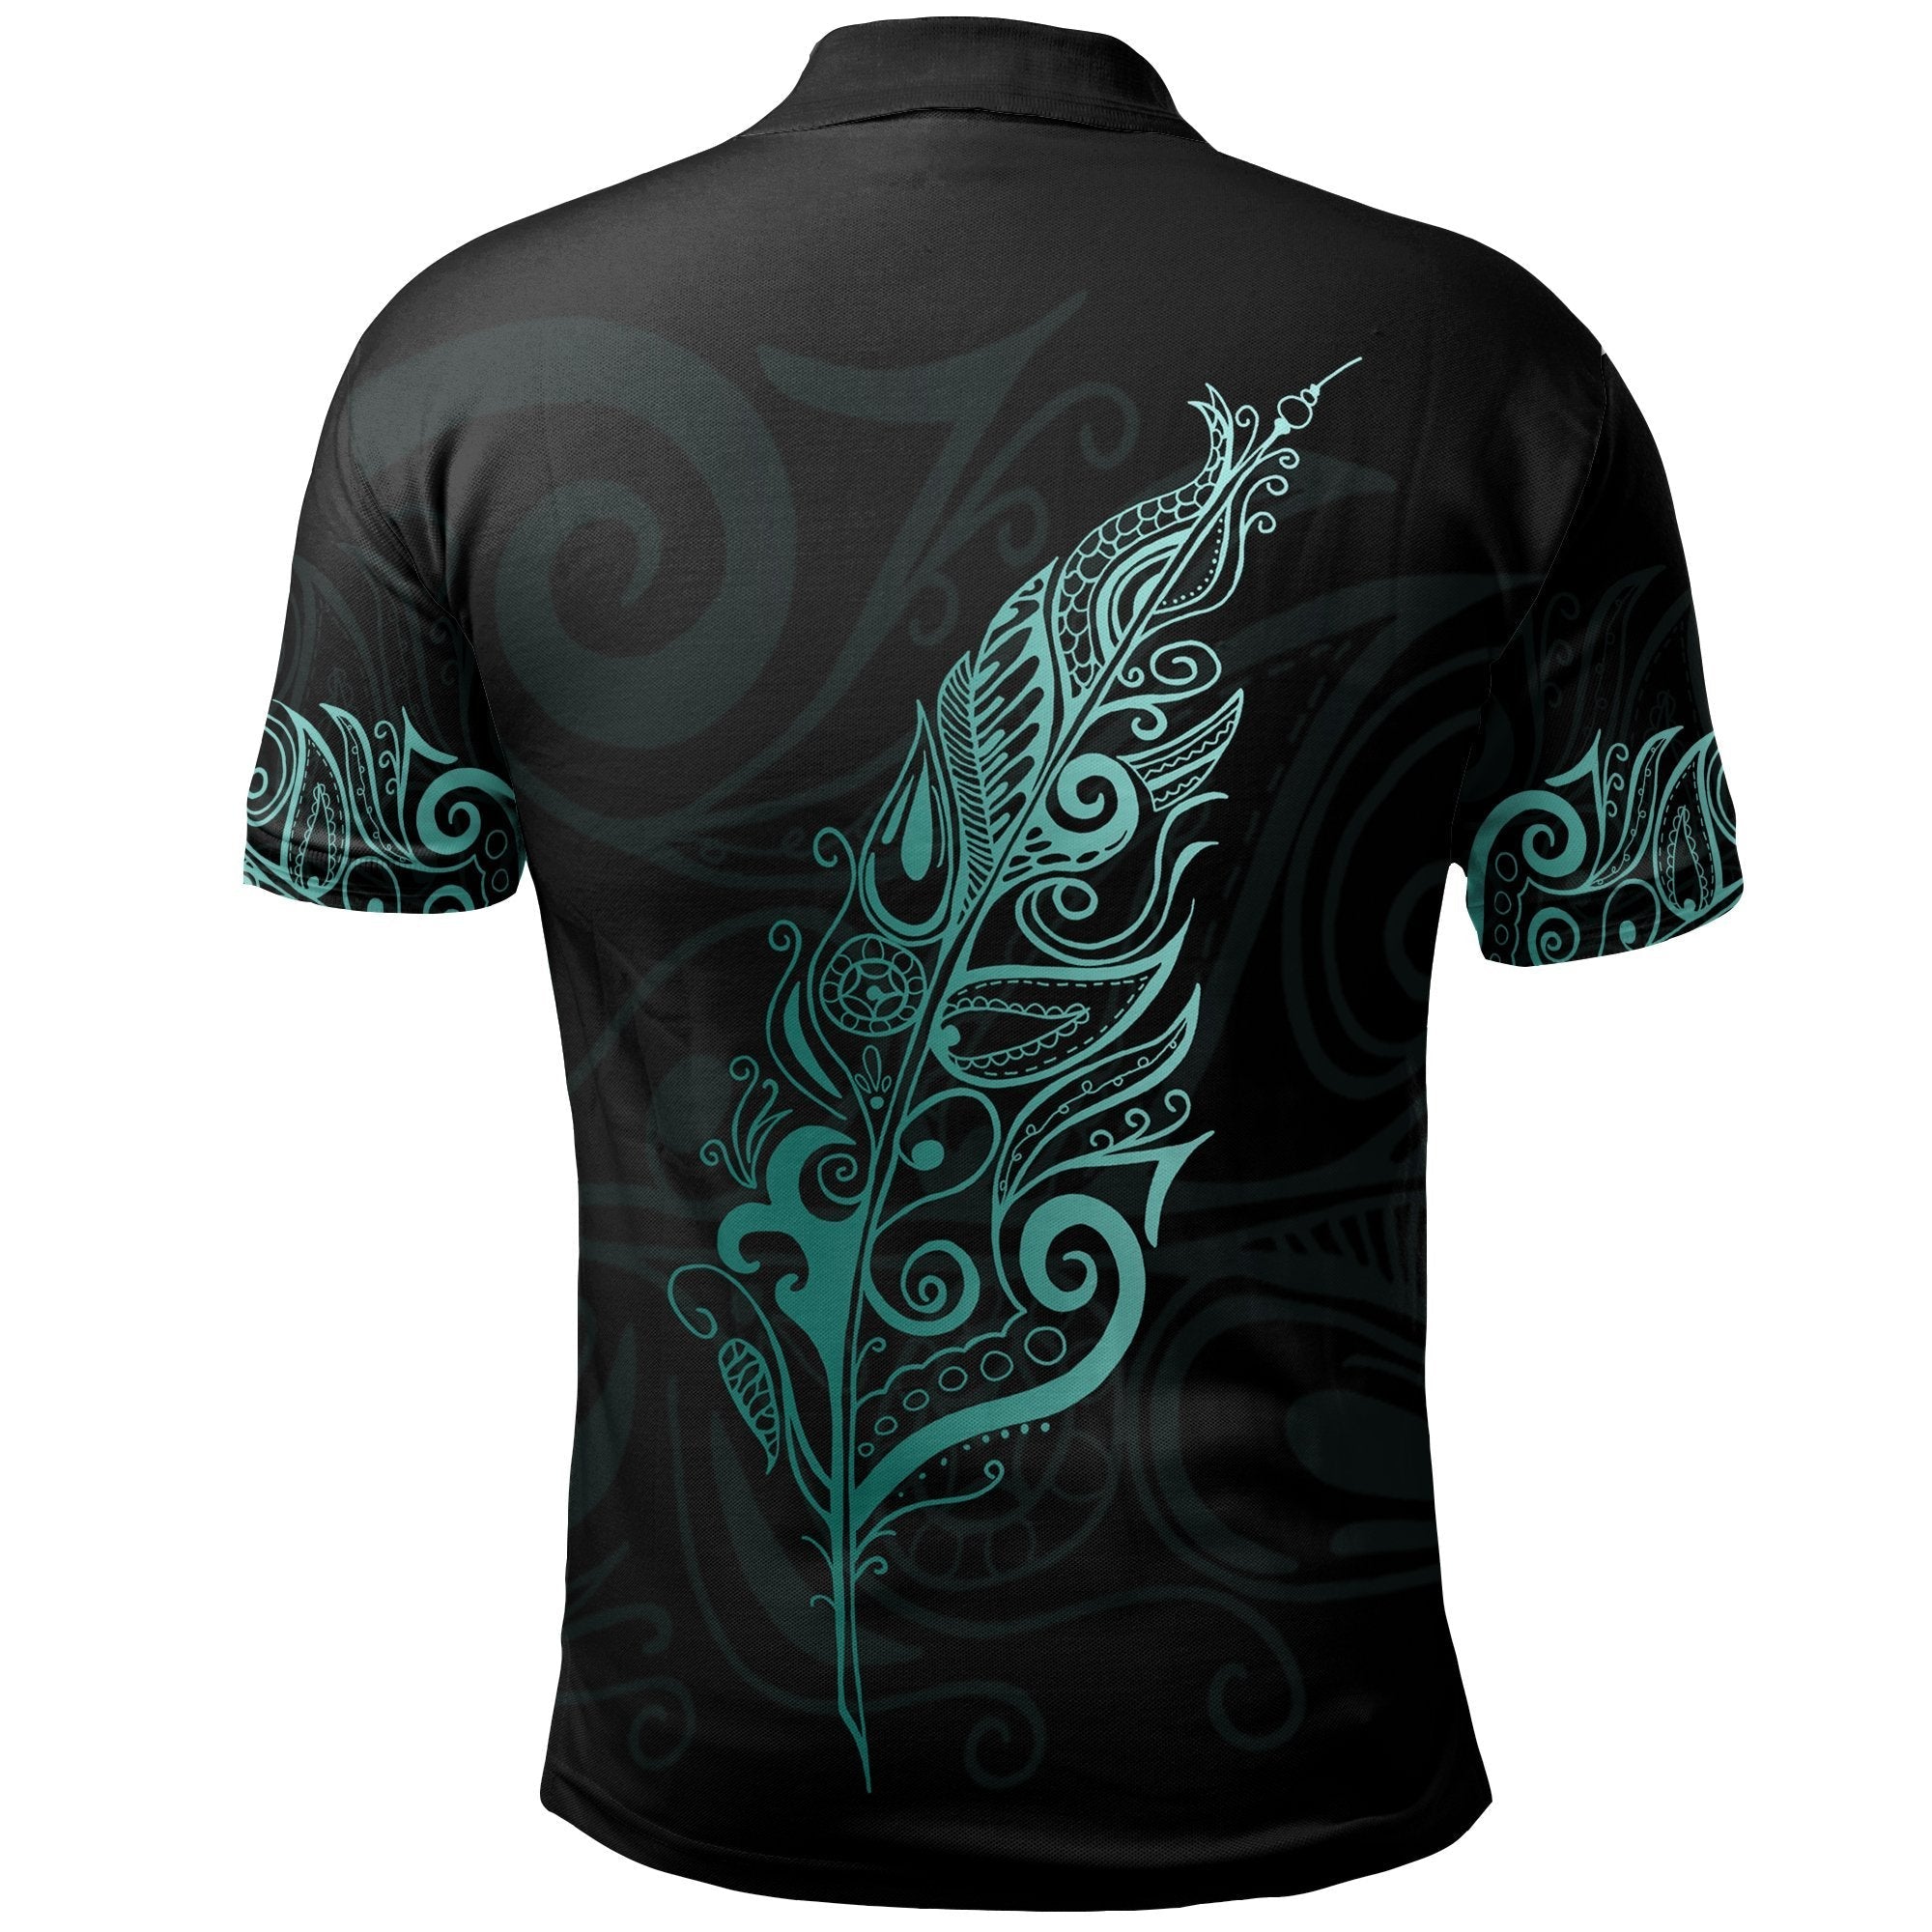 light-silver-fern-new-zealand-polo-shirt-turquoise